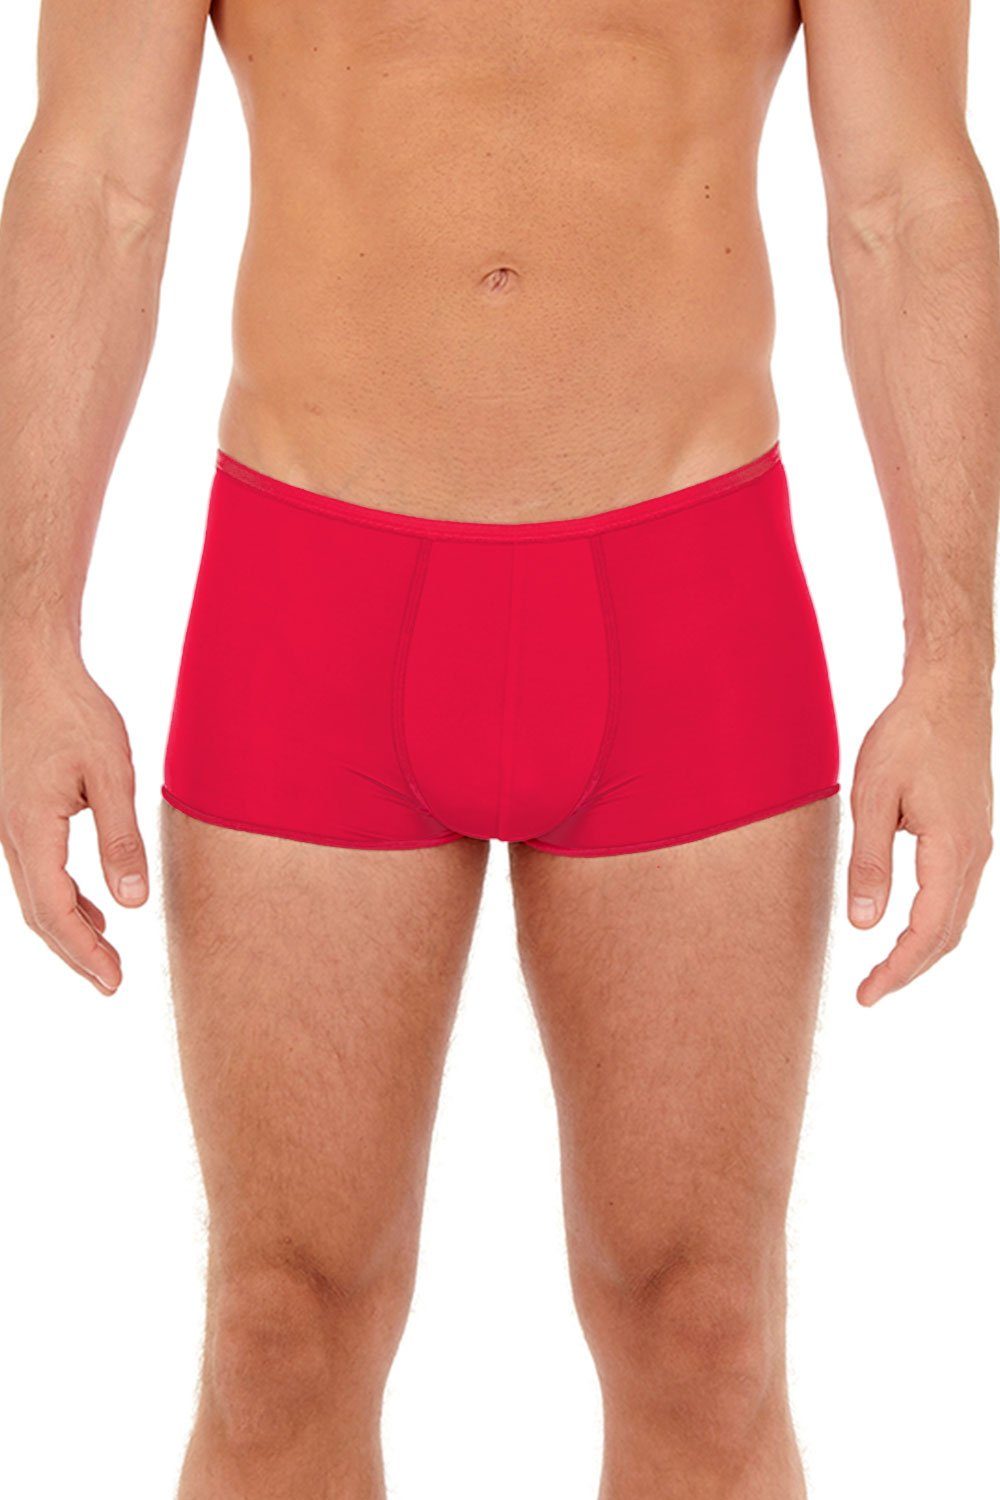 Hom Hipster 404755 red Trunk